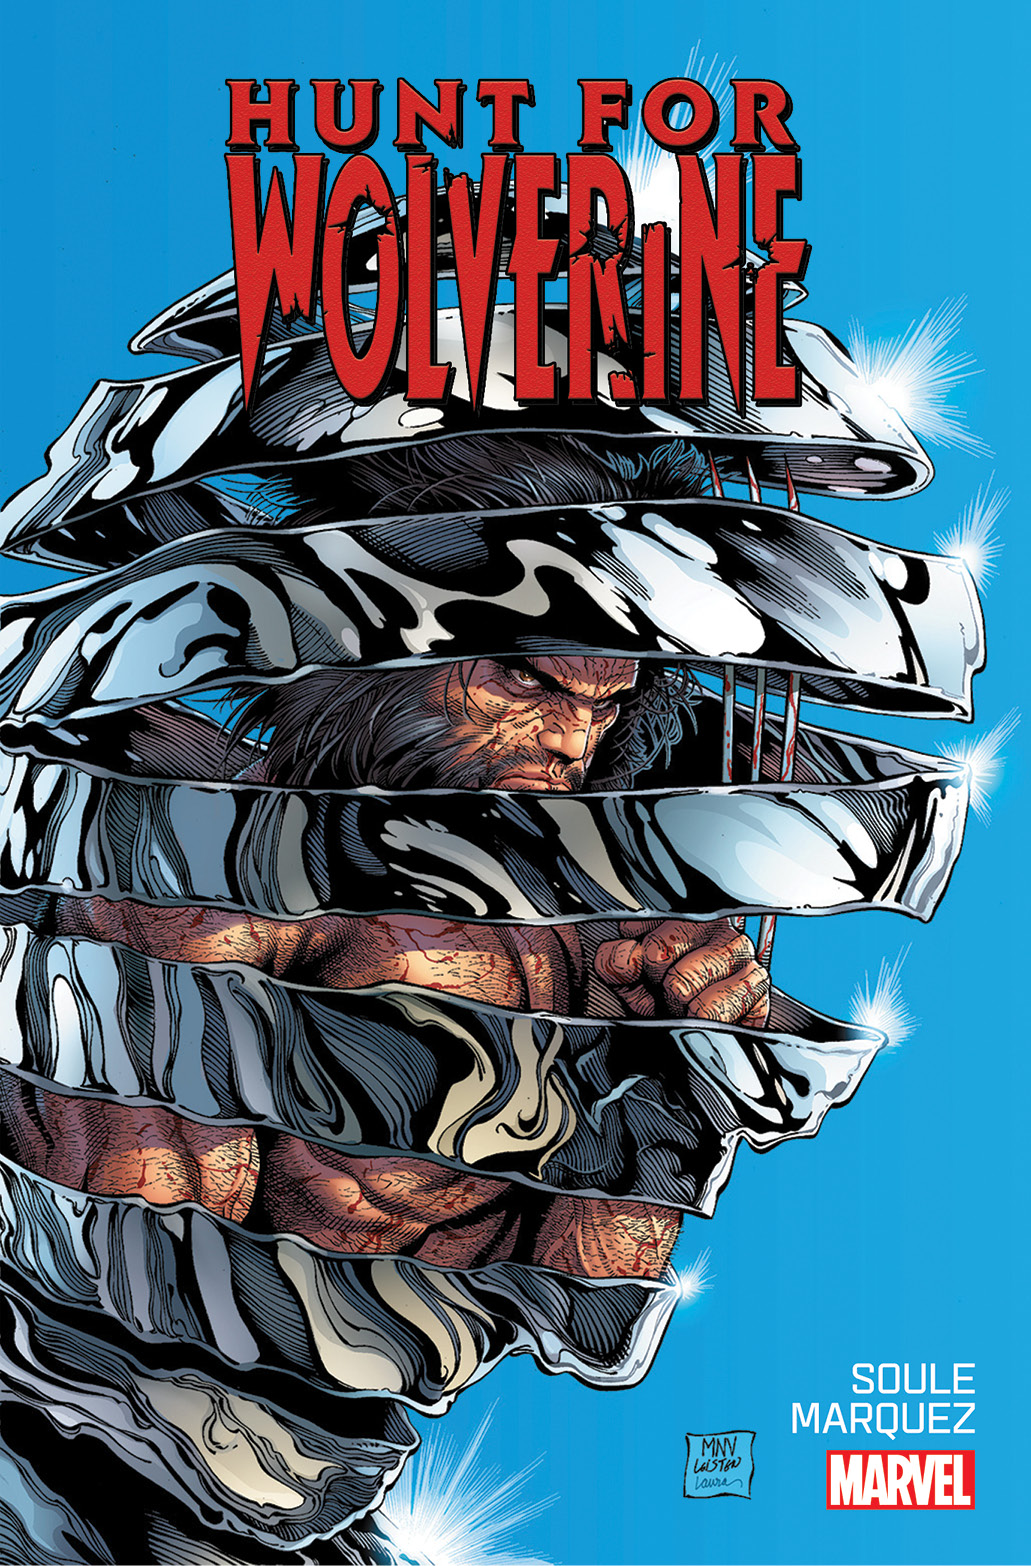 Gear up, the hunt for Wolverine starts in April